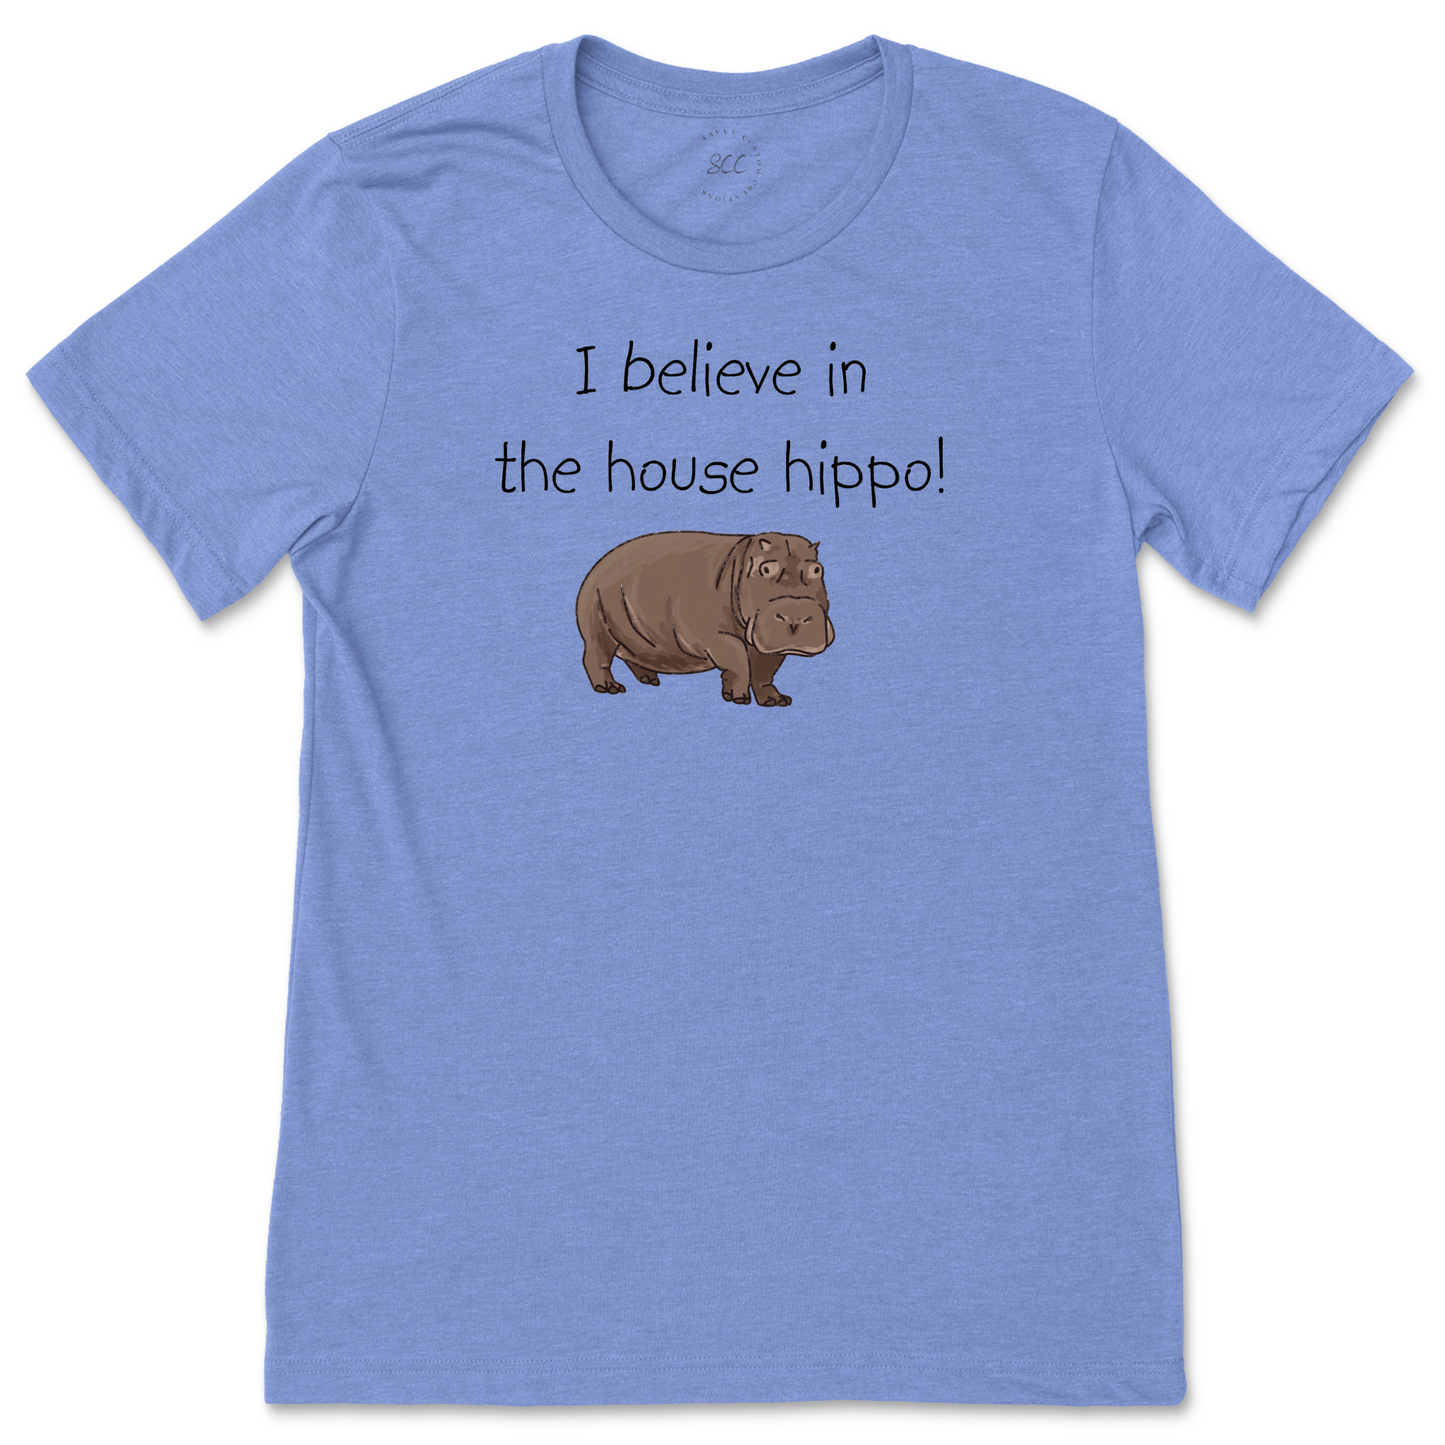 I BELIEVE IN THE HOUSE HIPPO! - Unisex Crewneck T-Shirt